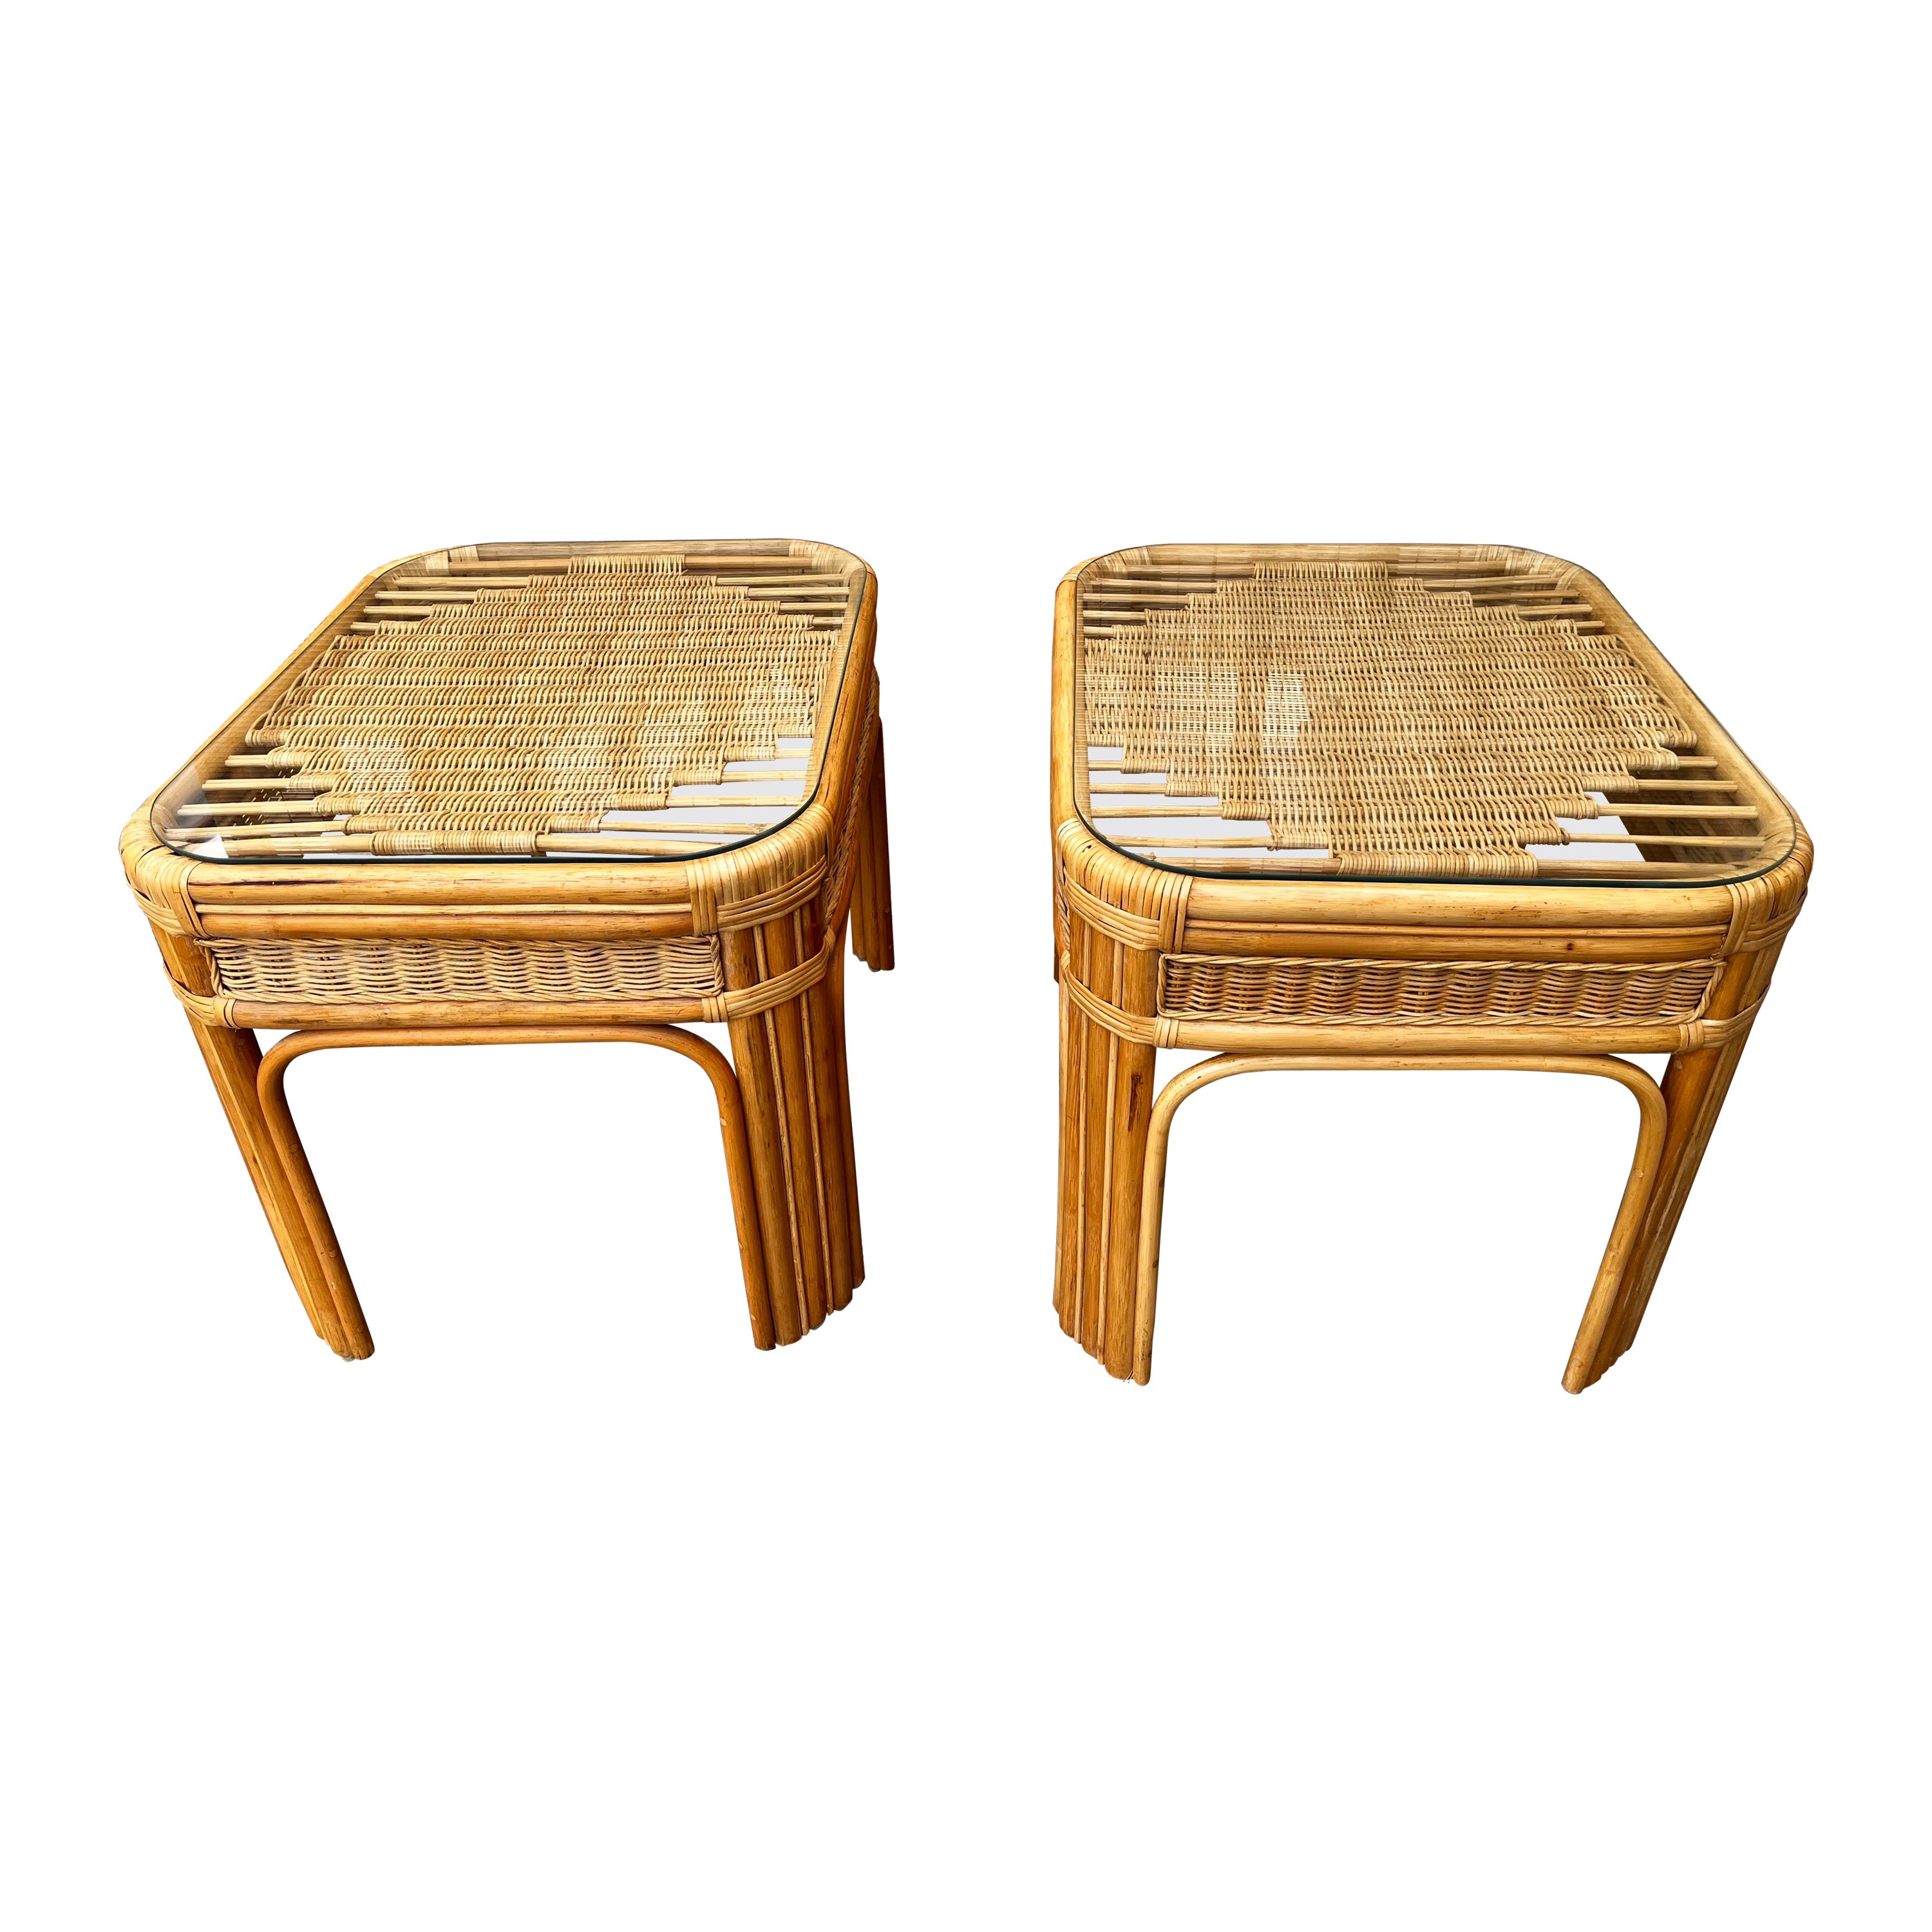 Pair of Large Late 20th Century Coastal Style Weaved Rattan Side Tables